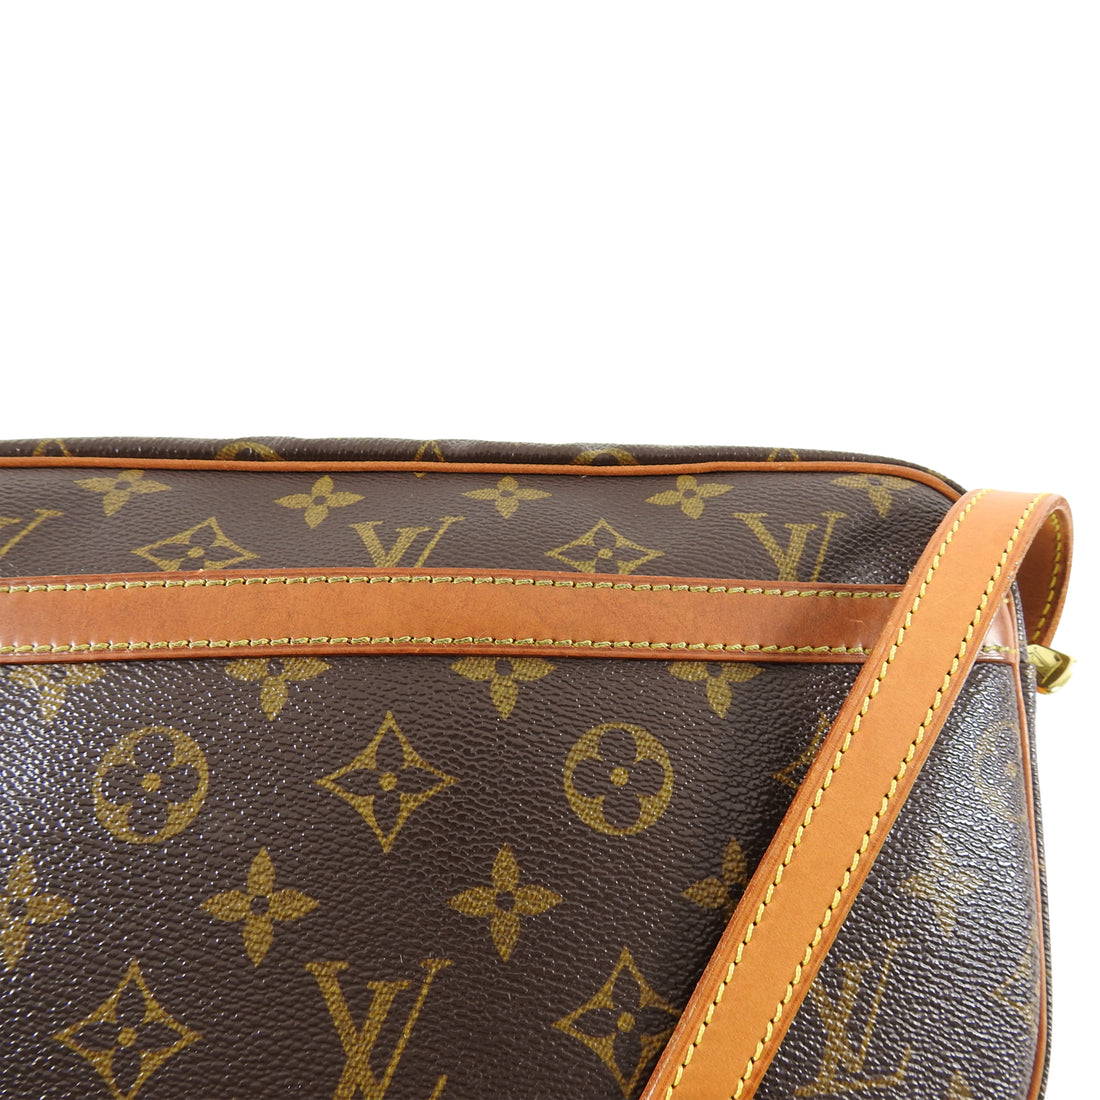 The Royal Bags Canada Inc. - Louis Vuitton JEUNE FILLE MM Monogram Asking:  💲🎉🎉🎉 Made in: FRANCE Date Code: TH Style: Crossbody/Sling Material:  Monogram Canvas Colour: Brown Includes: NO Measurements: 9 L